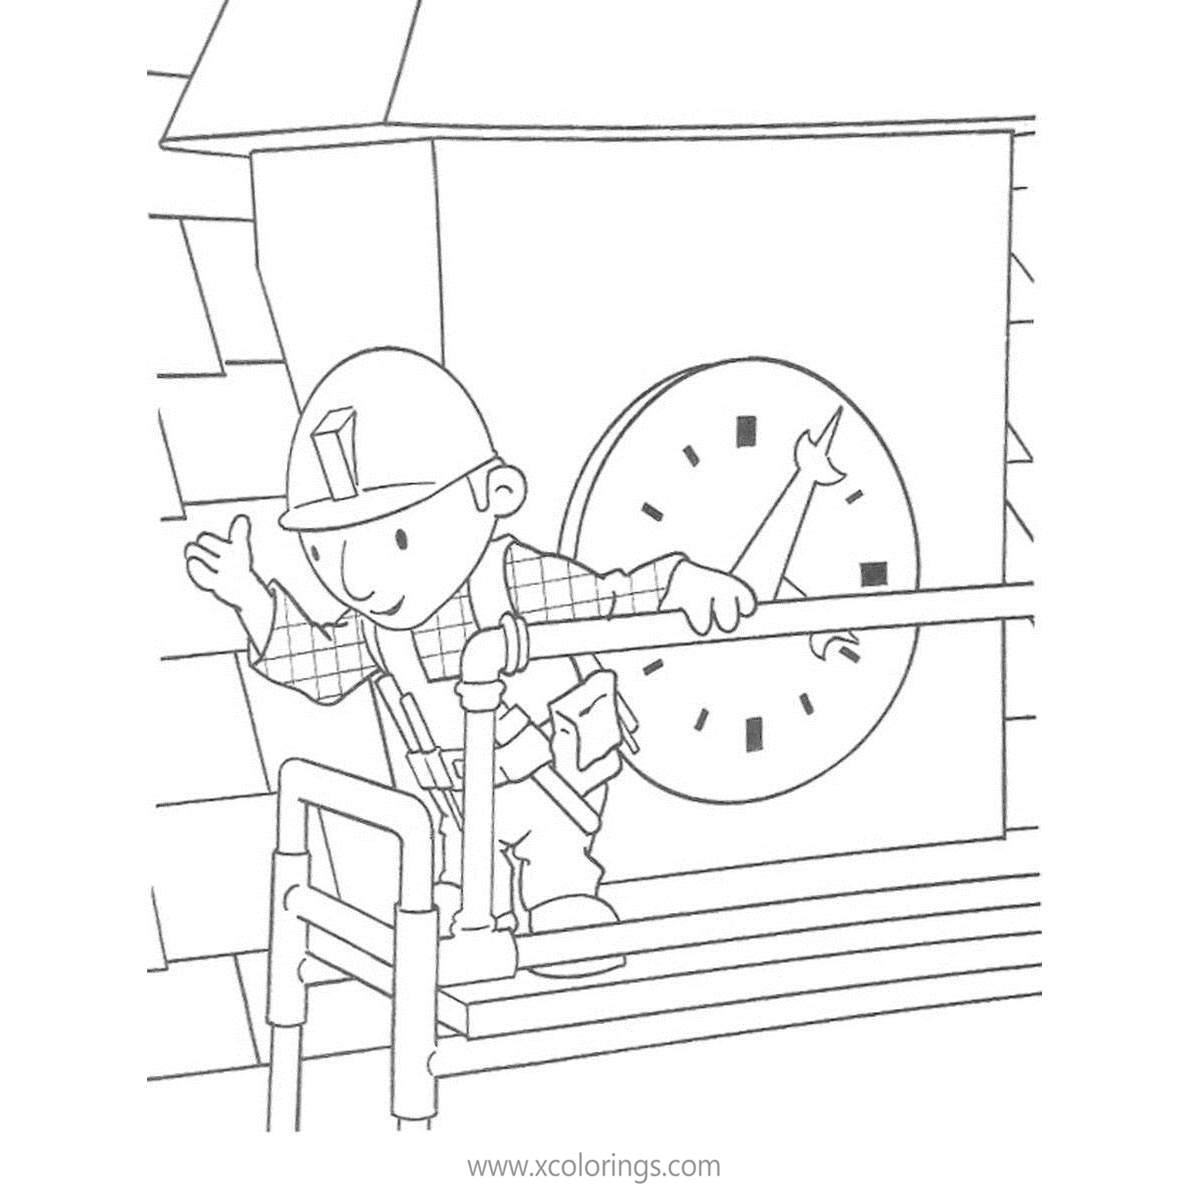 Free Bob The Builder Coloring Pages The Clock is Bad printable